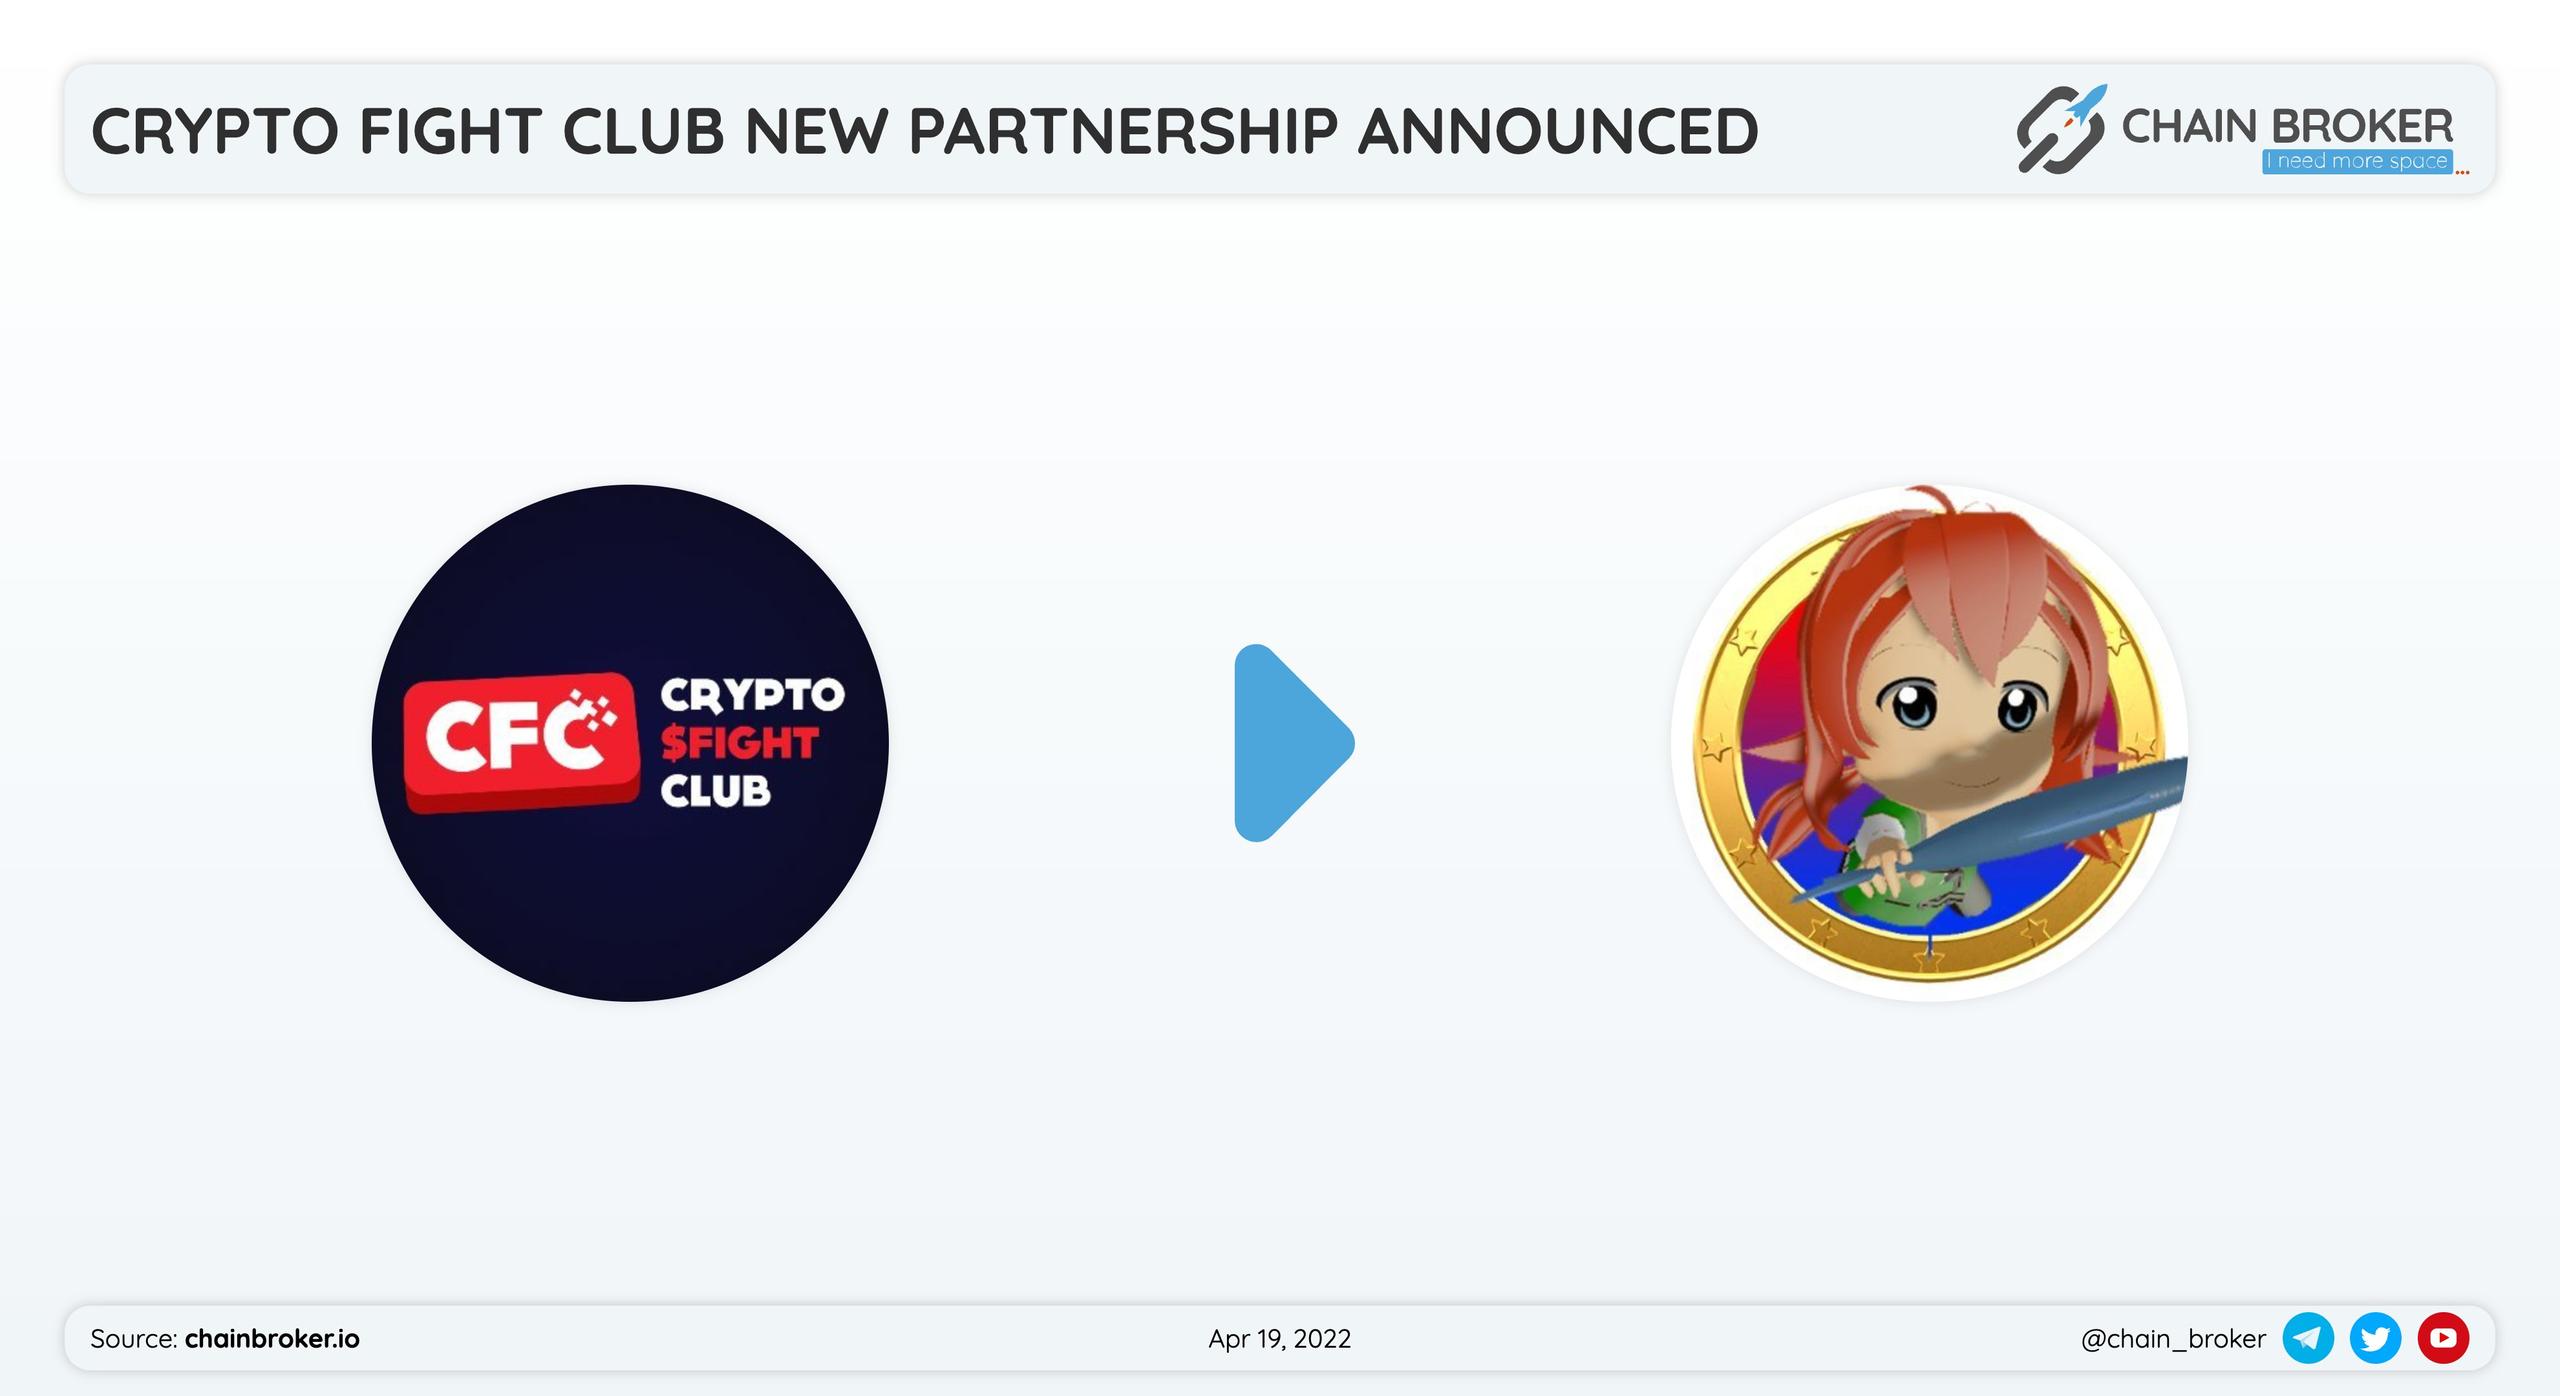 Crypto Fighting Club has partnered with Tefaria for an NFT collection.